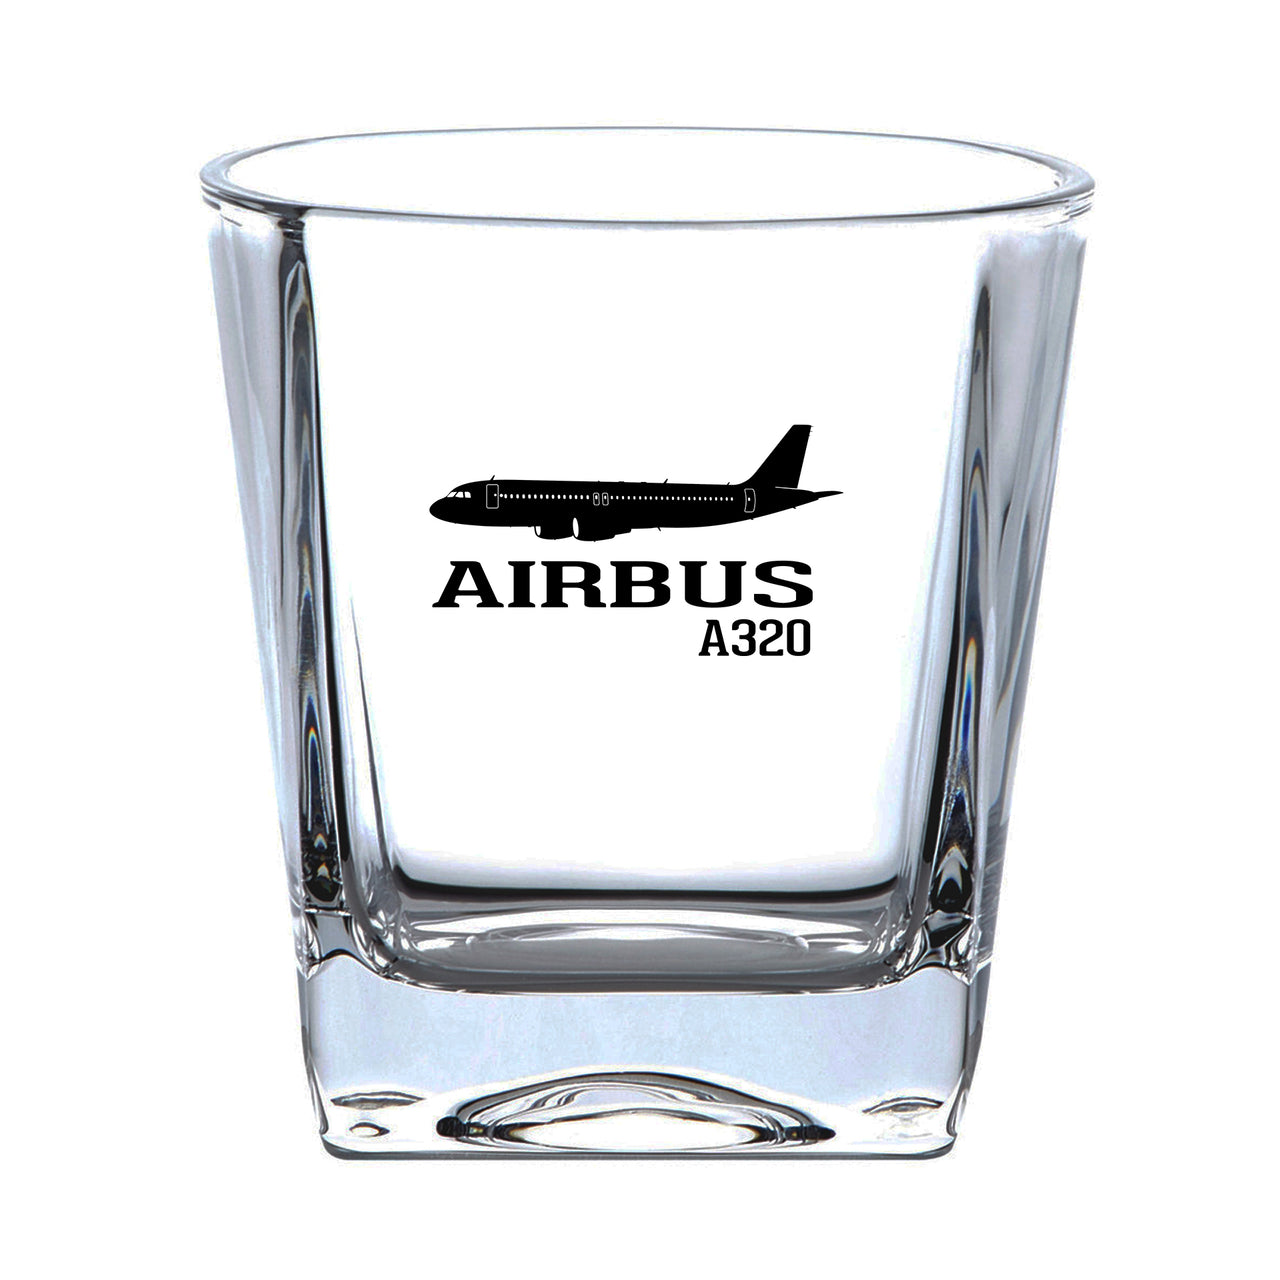 Airbus A320 Printed Designed Whiskey Glass